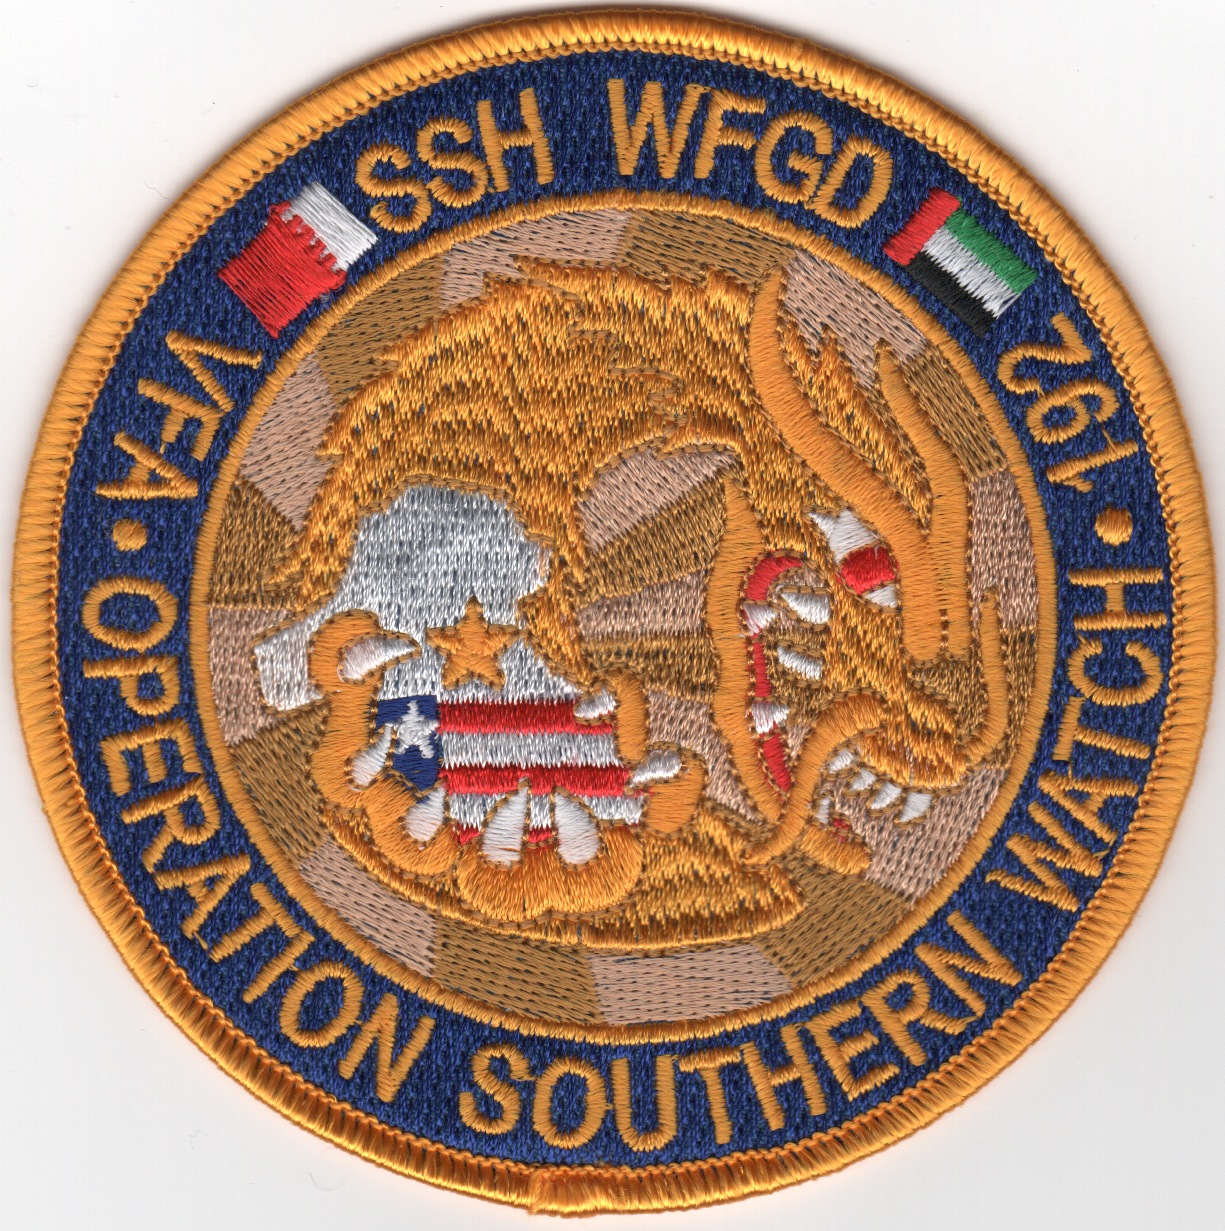 VFA-192 1992 'OSW' Cruise Patch